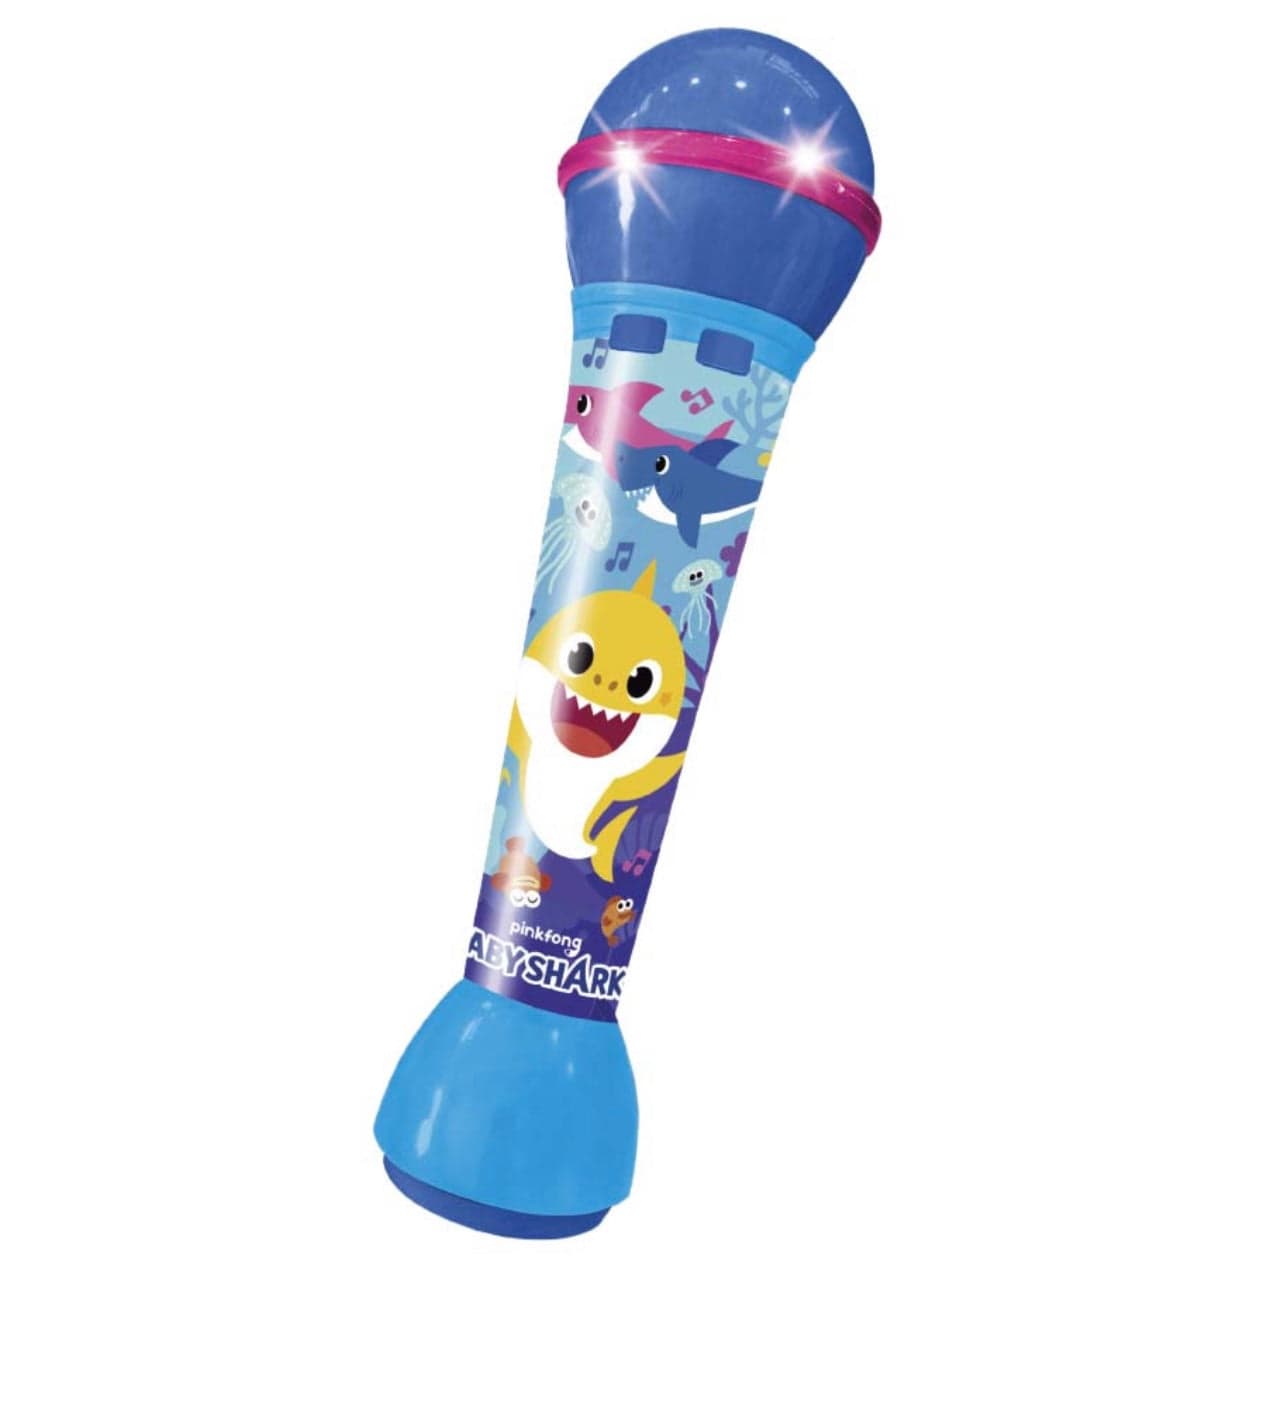 Pinkfong Baby Shark Microphone Light and Sound